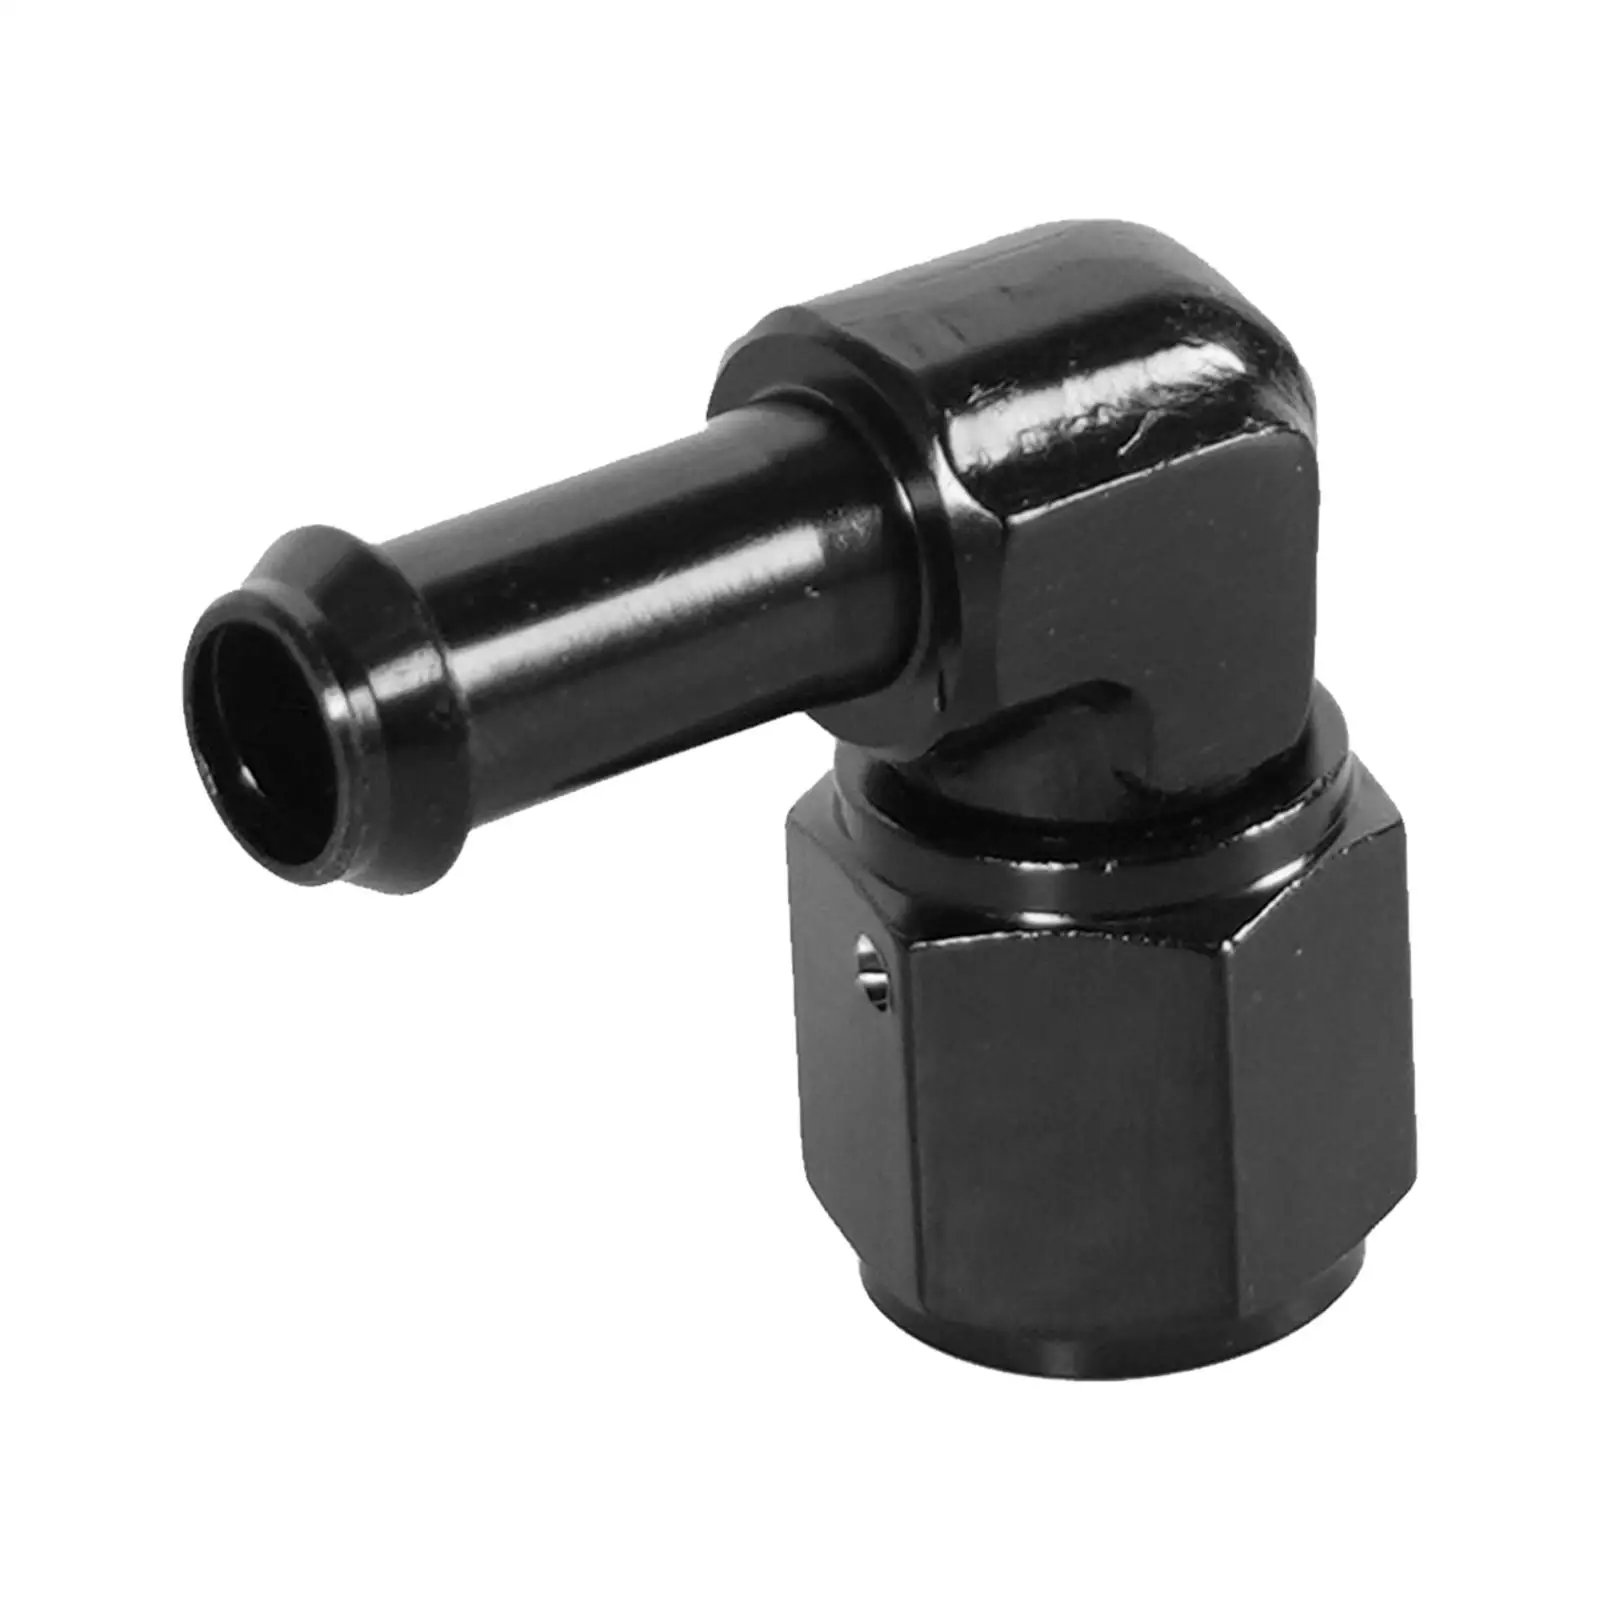 Aluminum 6AN Female Swivel Coupler Hose Fittings Adaptor 90 Degree Black Anodized Finish for Oil Fuel Gas Water Fluid Hose Ends